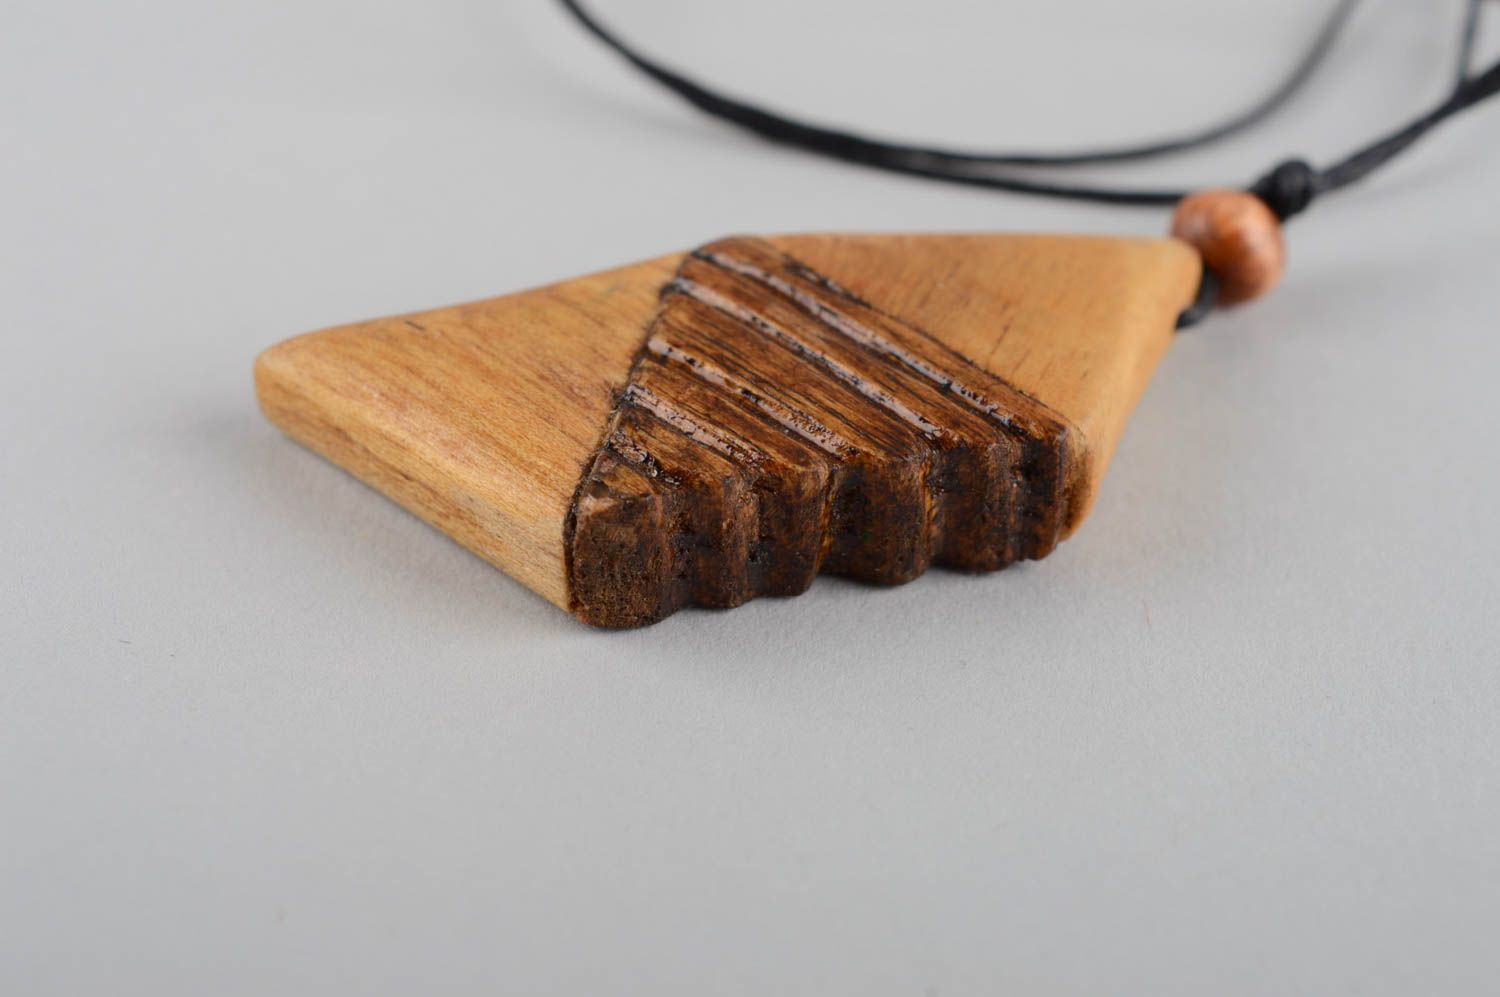 Stylish handmade wooden pendant artisan jewelry designs wood craft gifts for her photo 9